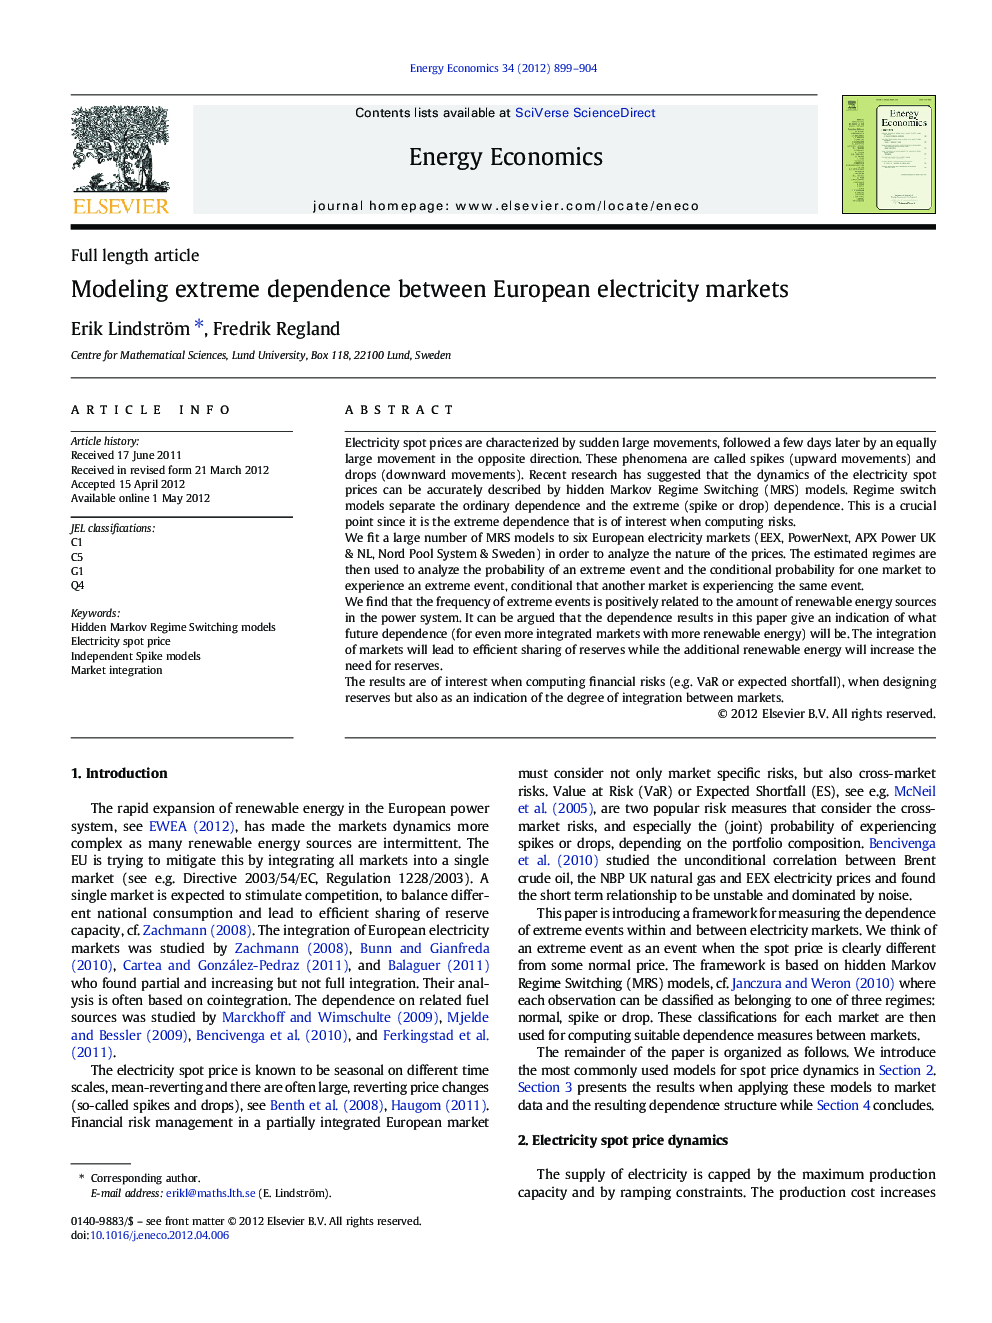 Full length articleModeling extreme dependence between European electricity markets